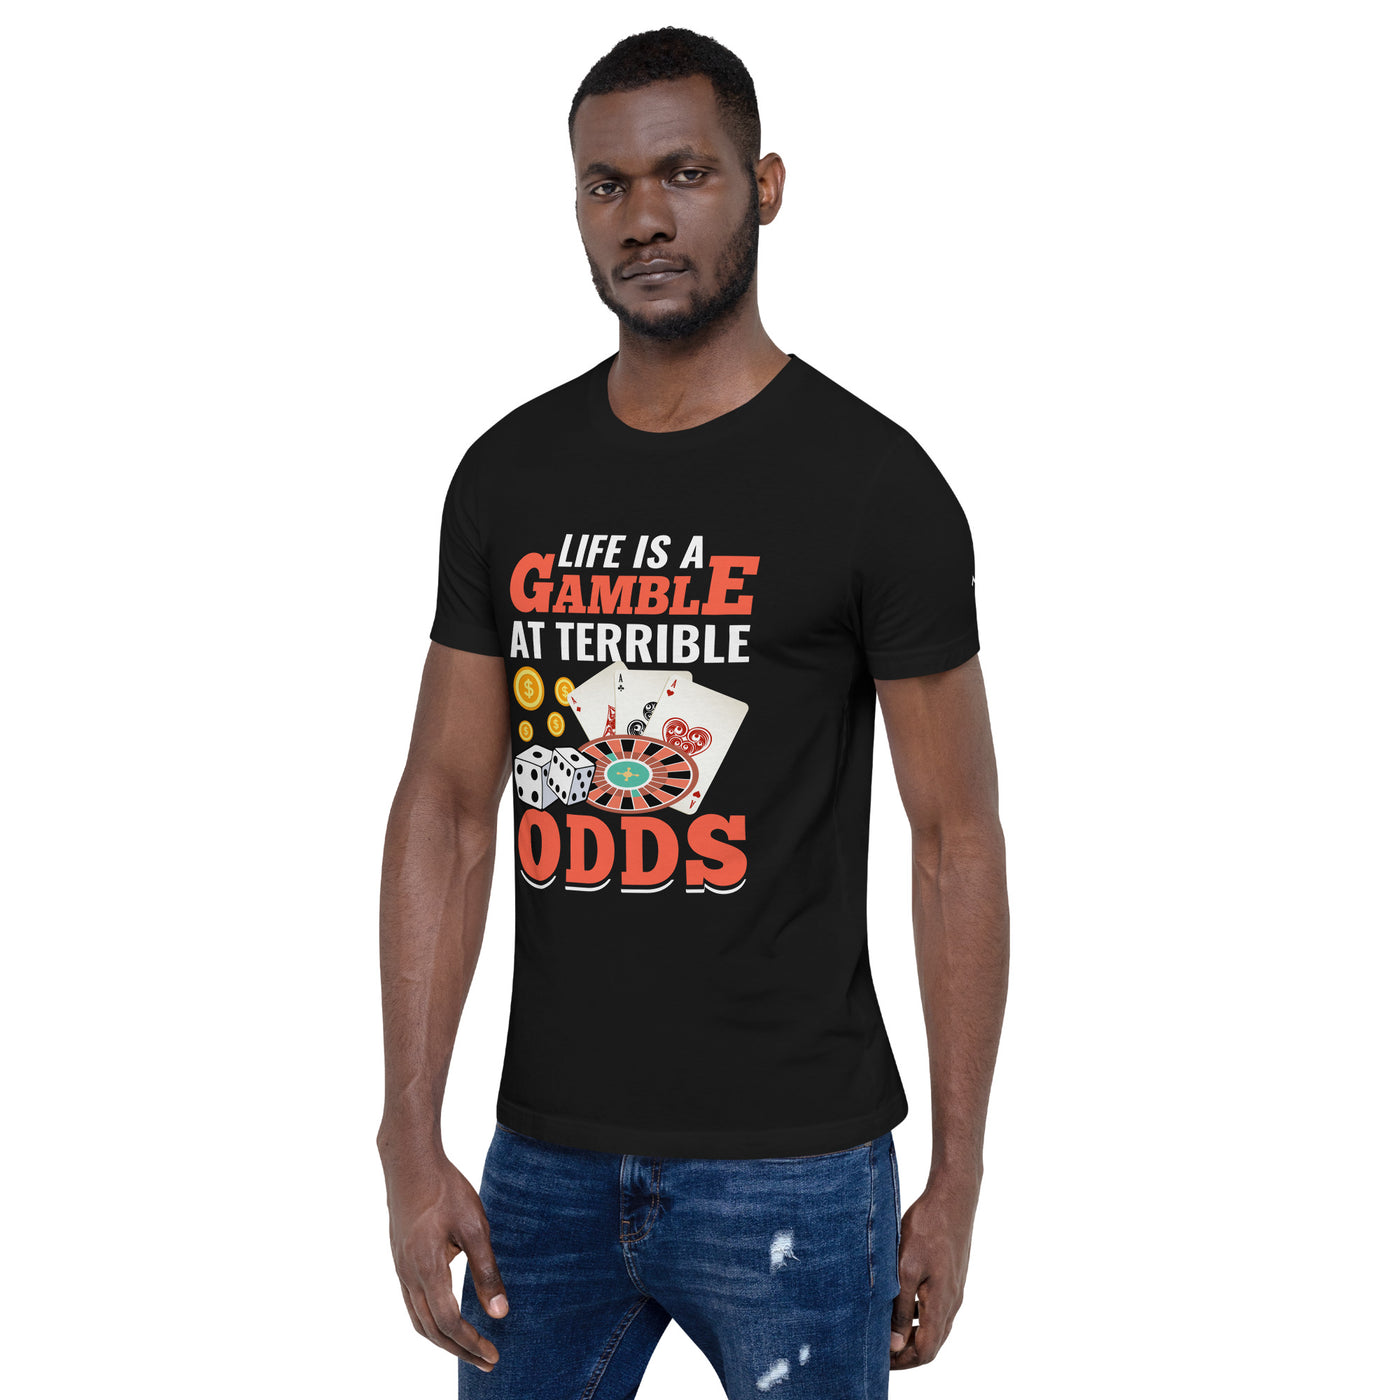 Life is a Gamble at terrible Odds - Unisex t-shirt